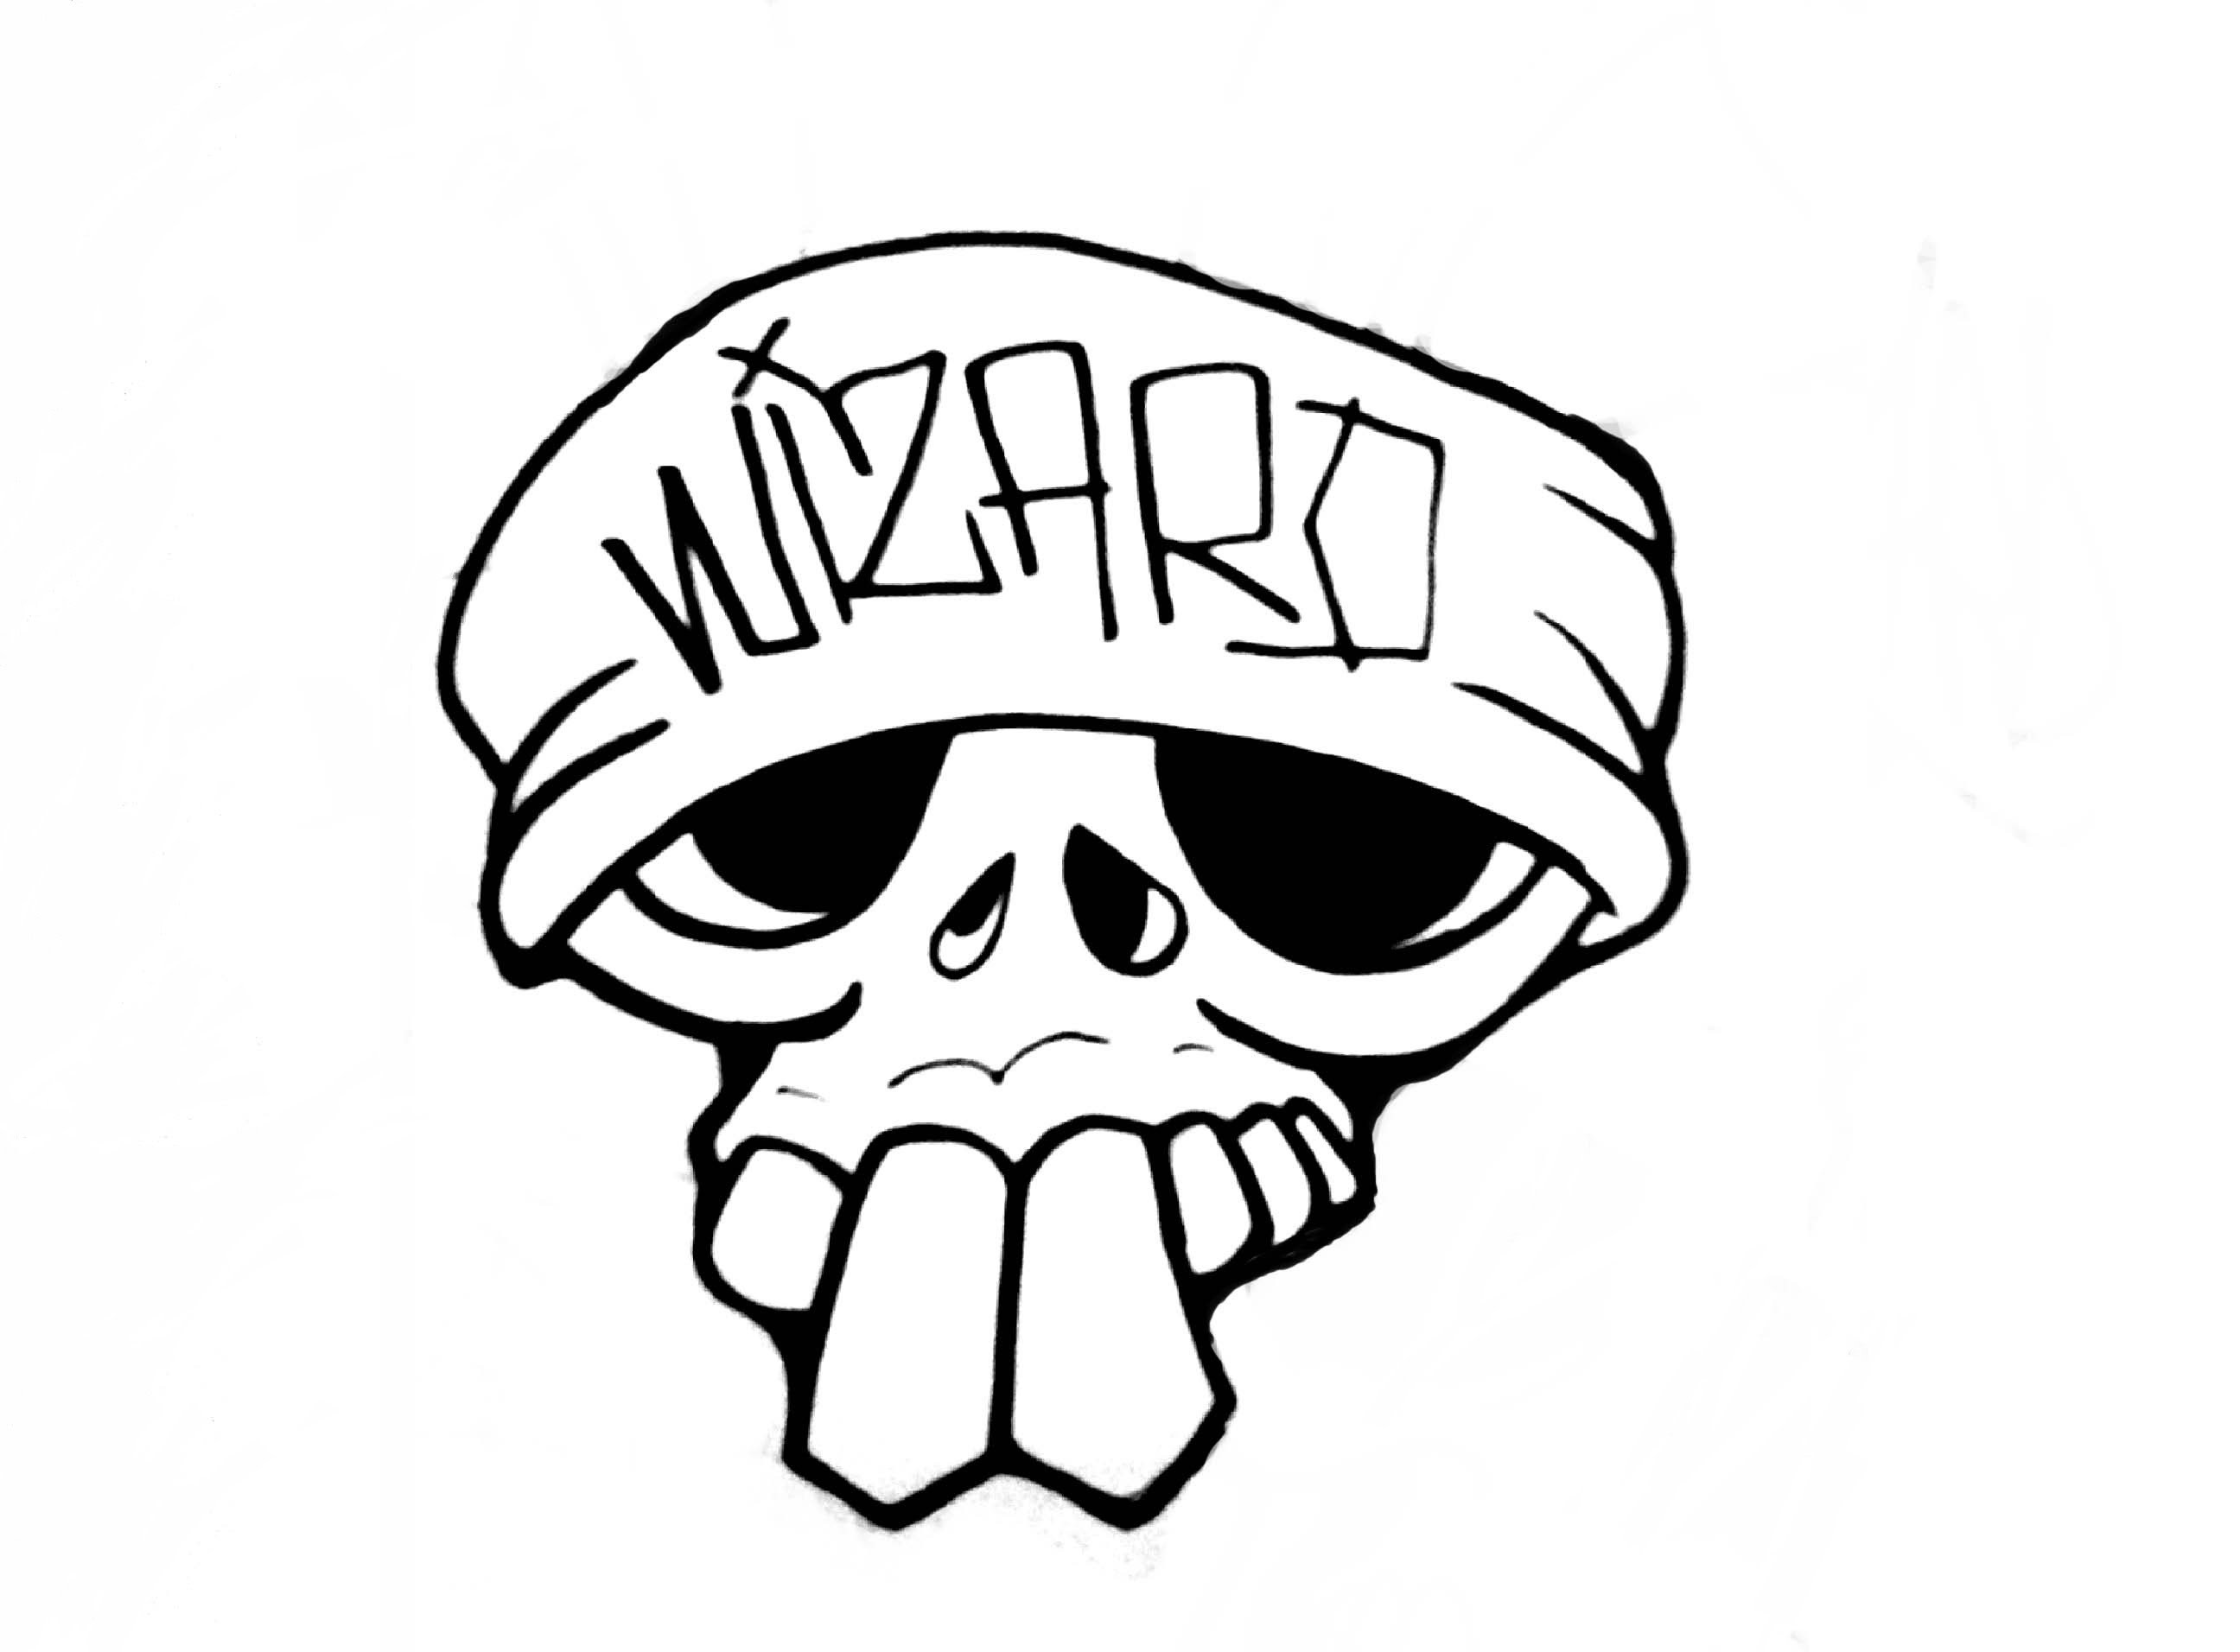 Easy Steps To Draw A Skull Easy To Draw Graffiti Learn How To Draw...